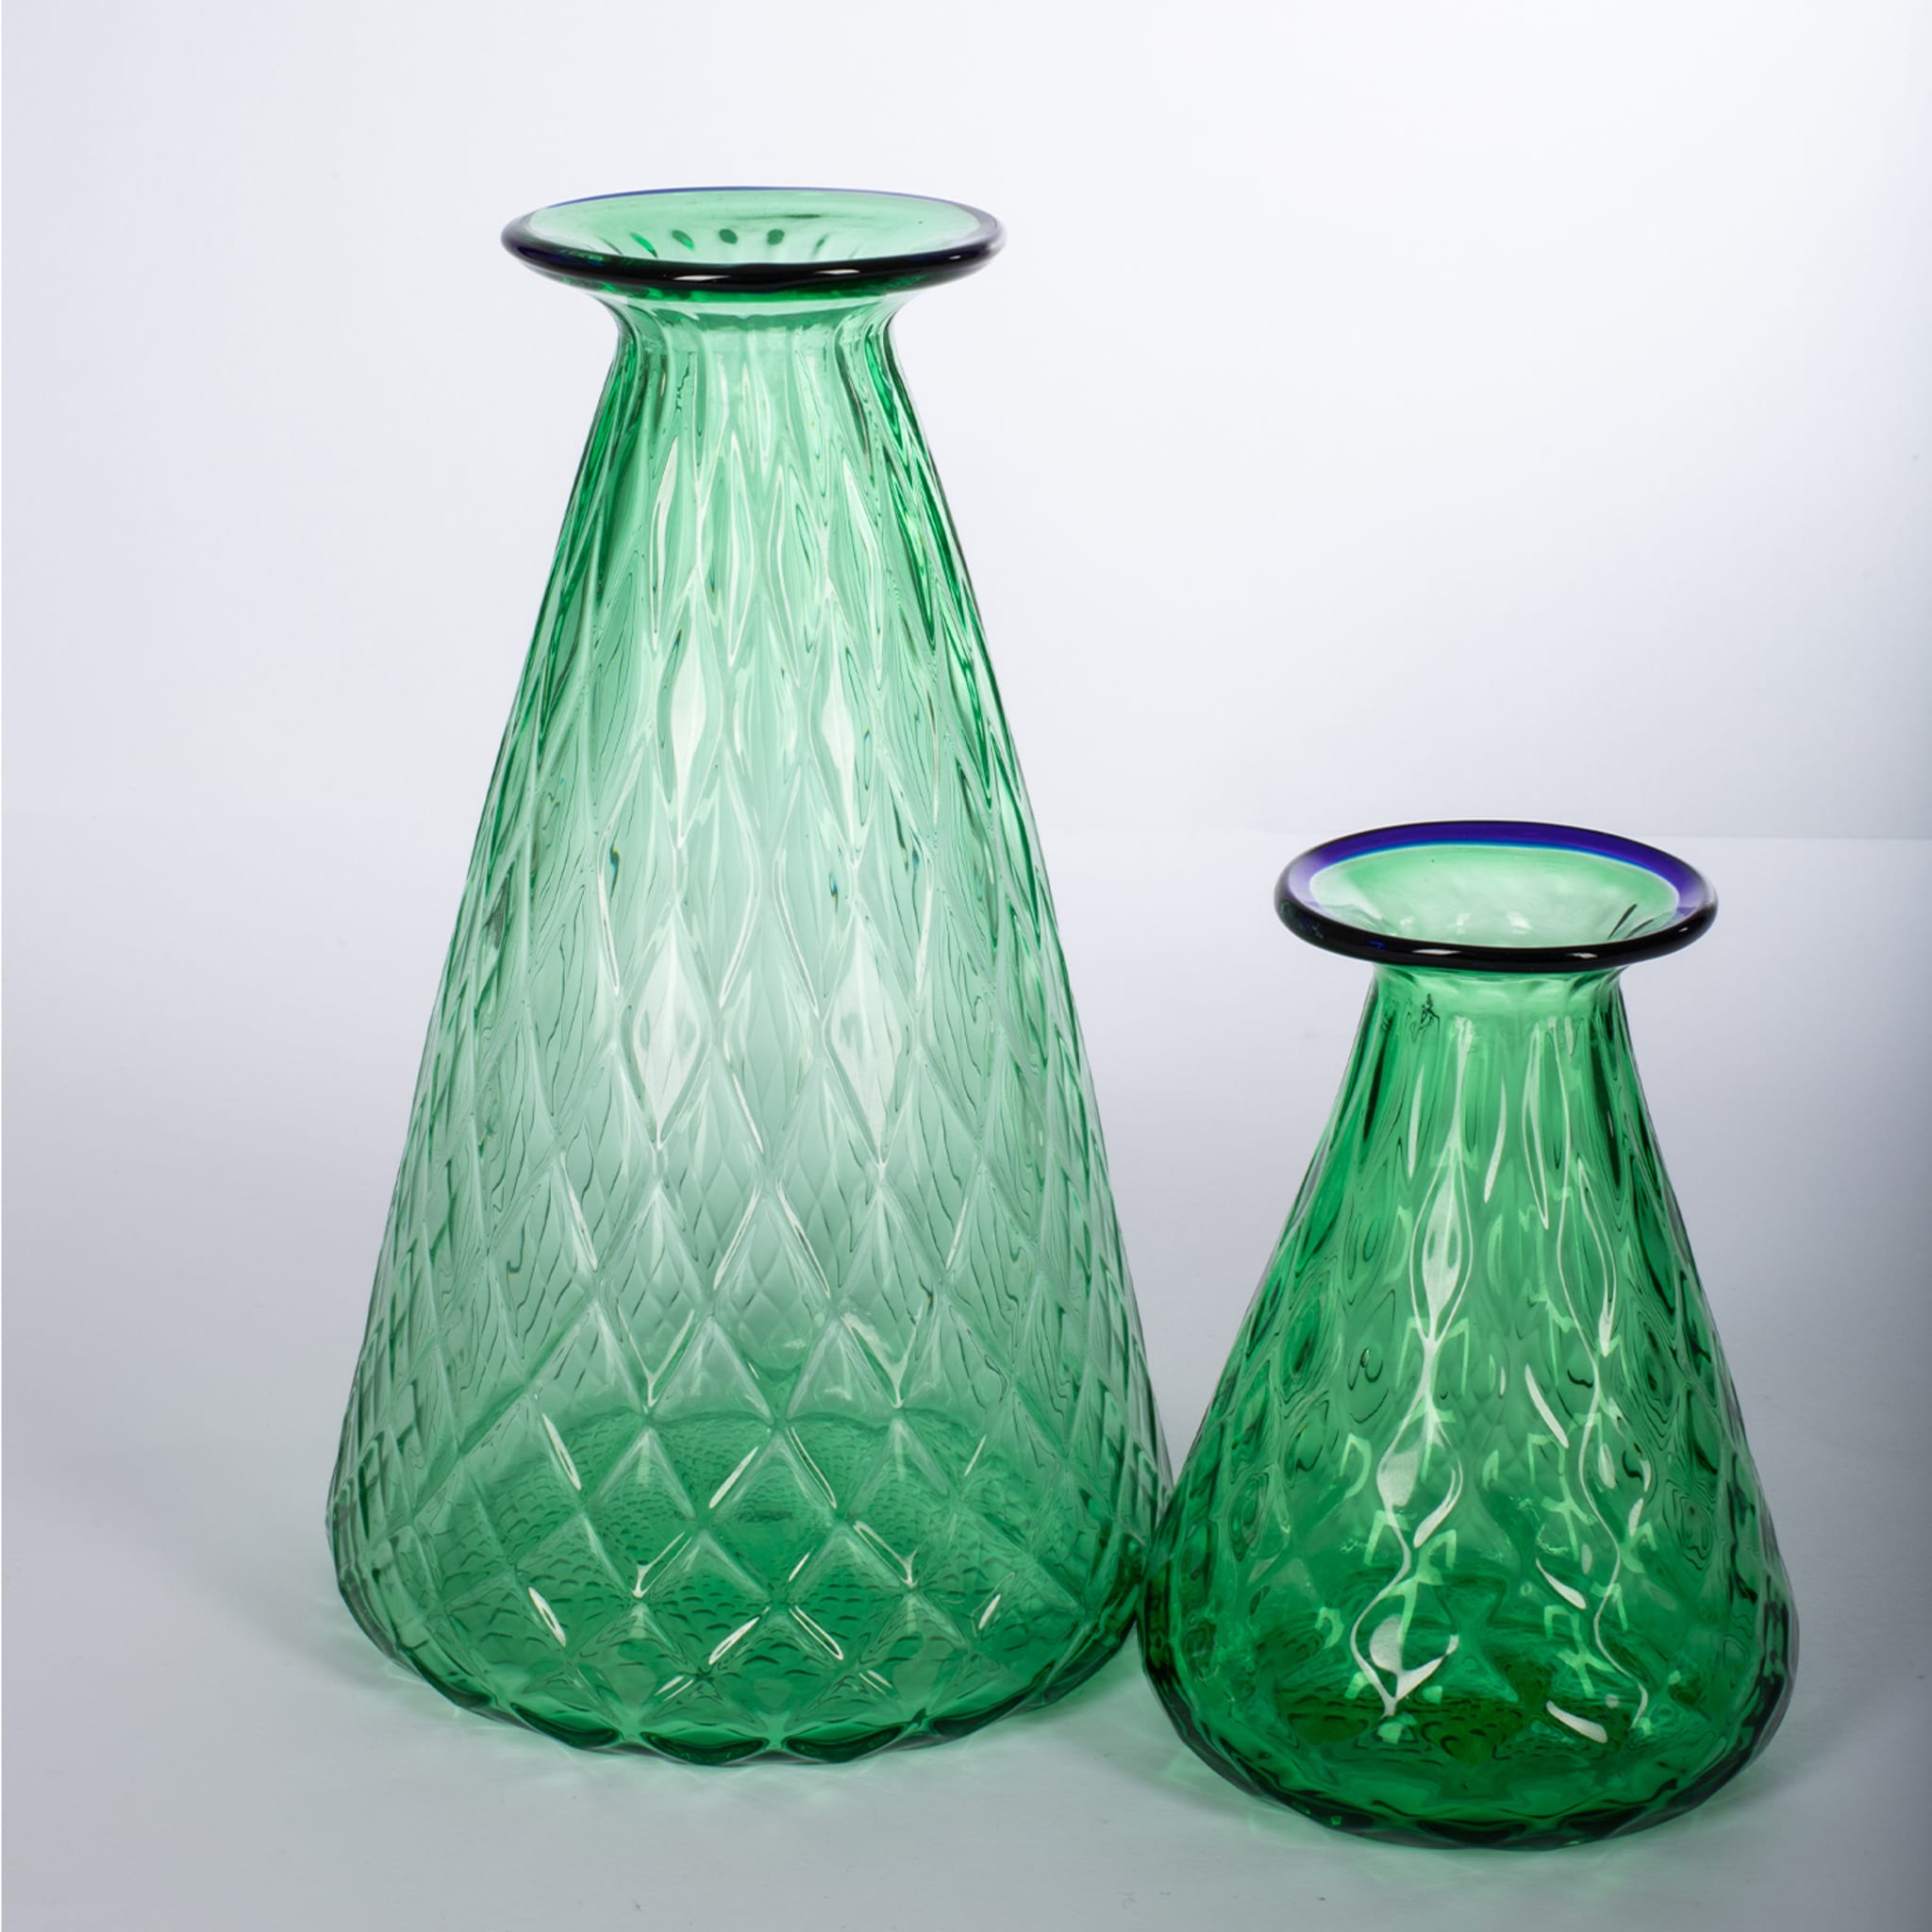 Balloton Set of 2 Conical Green Vases - Alternative view 3